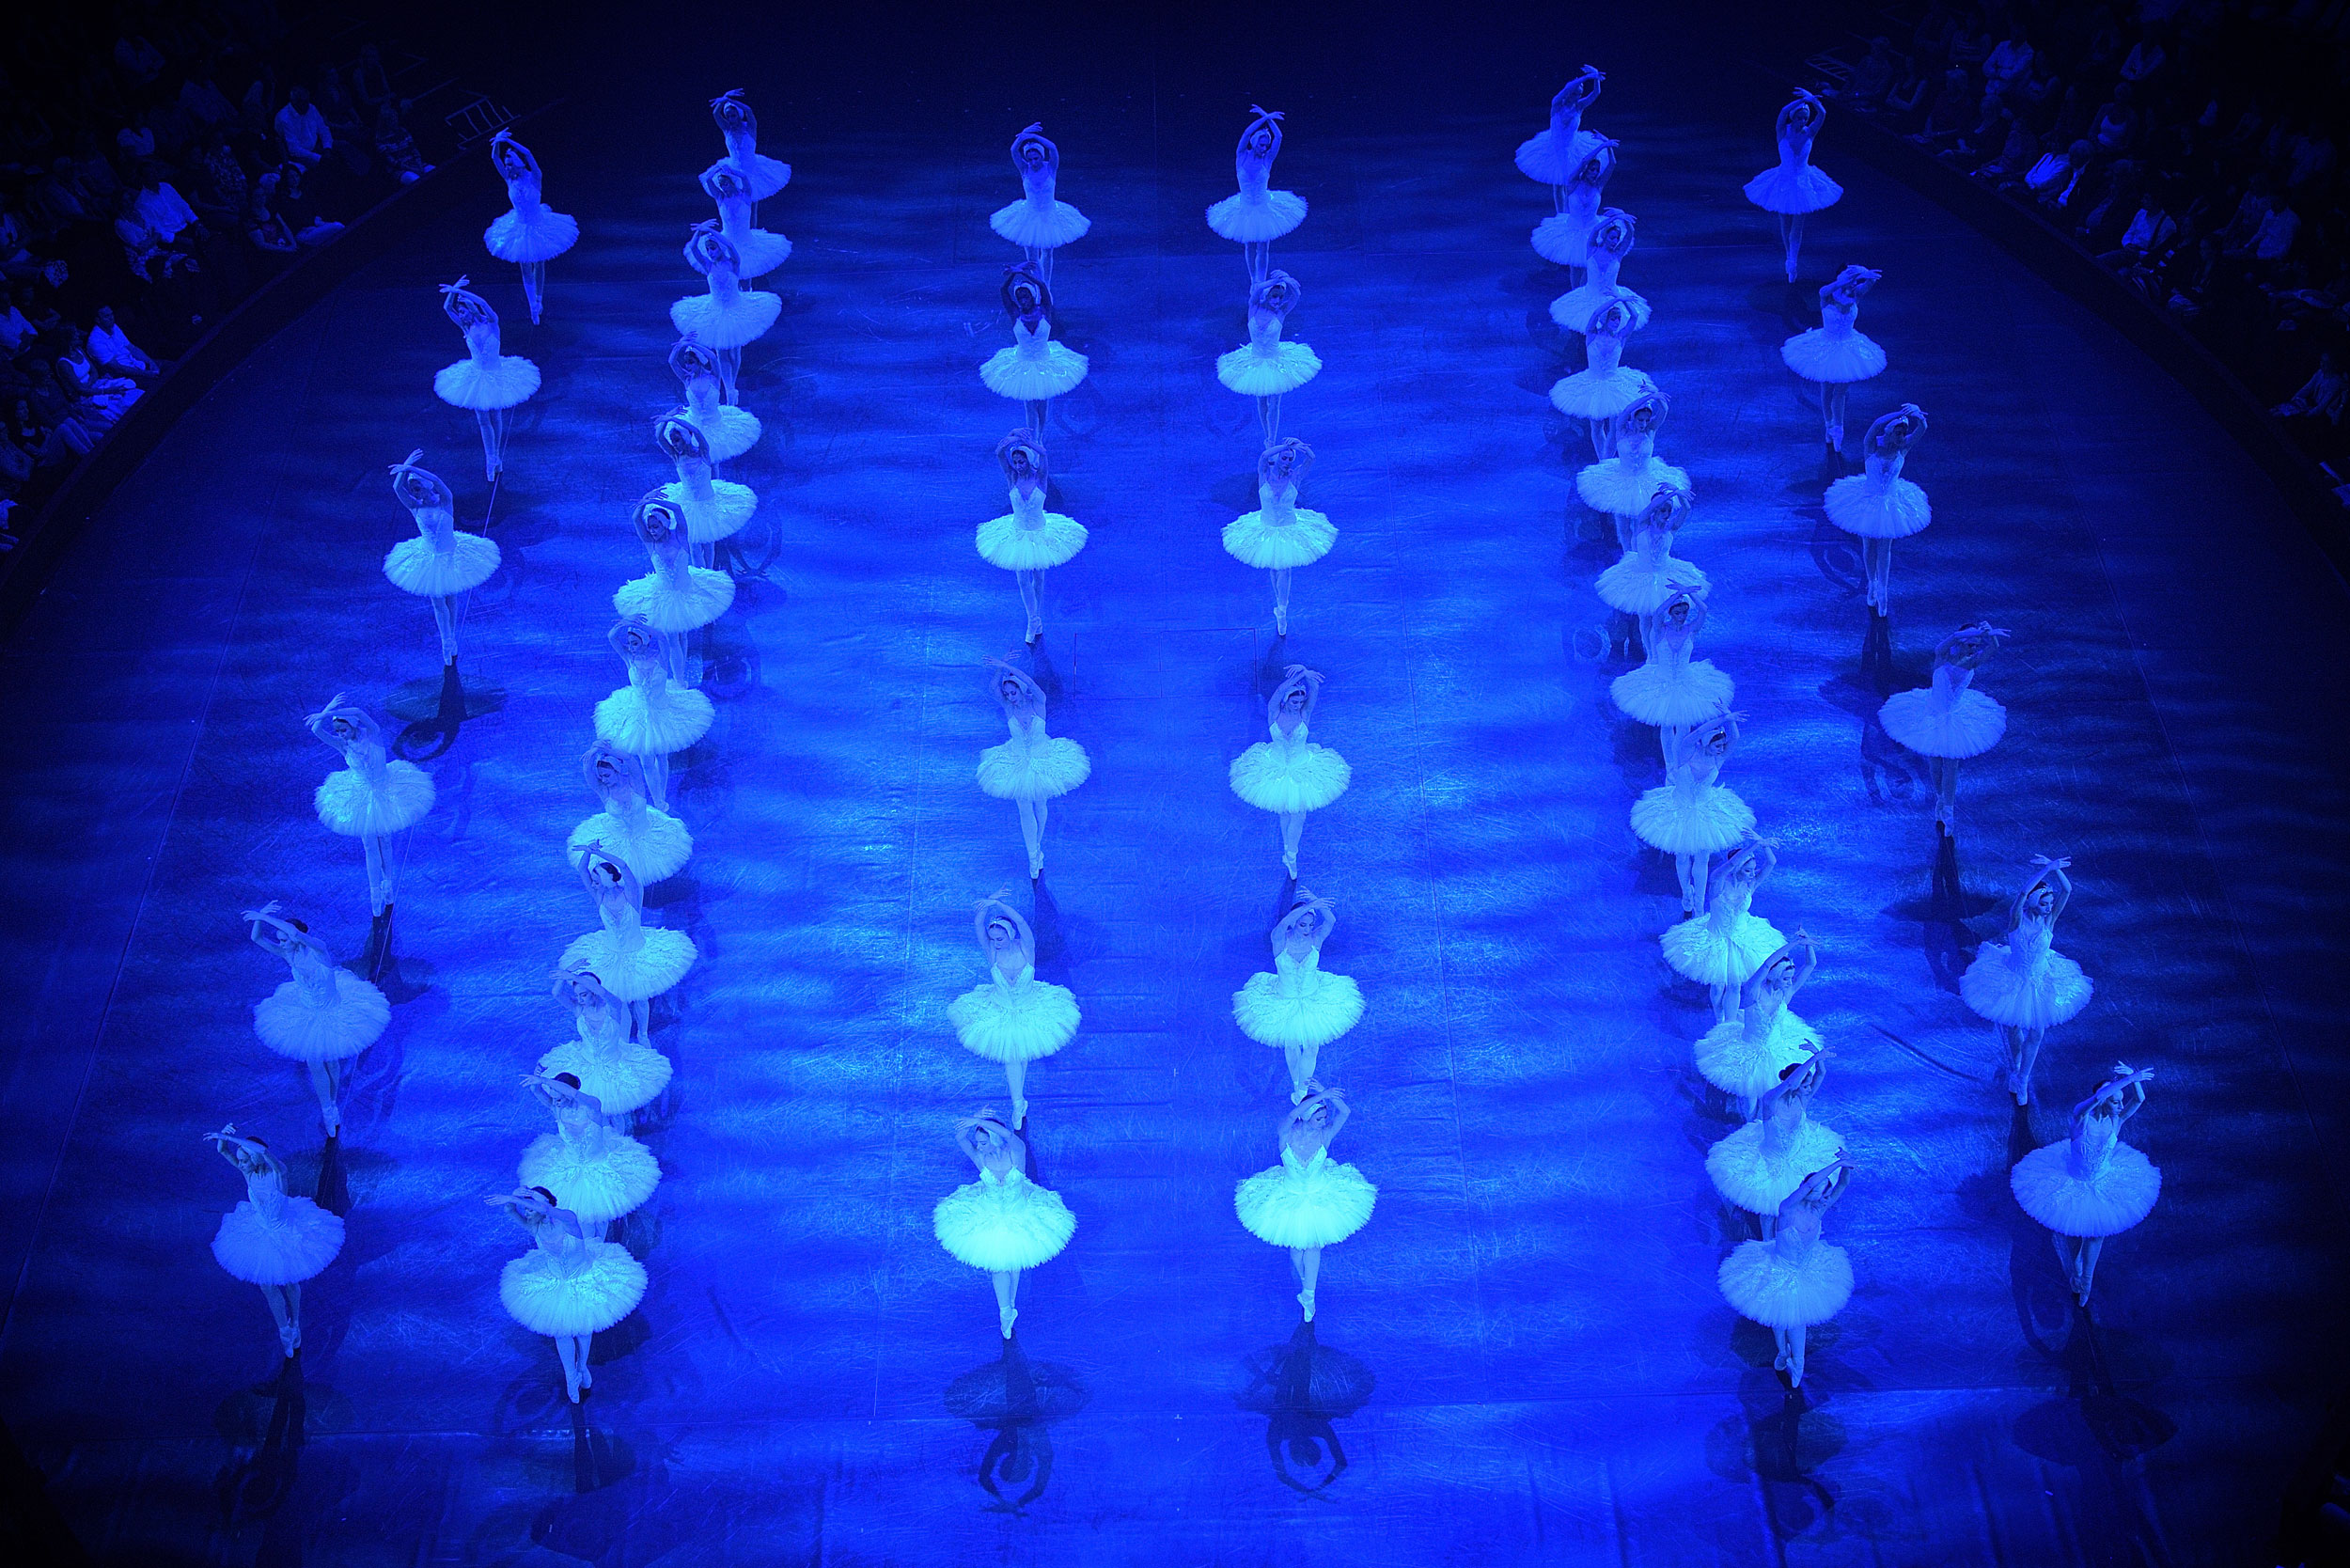 Dancers of English National Ballet in Swan Lake in the round